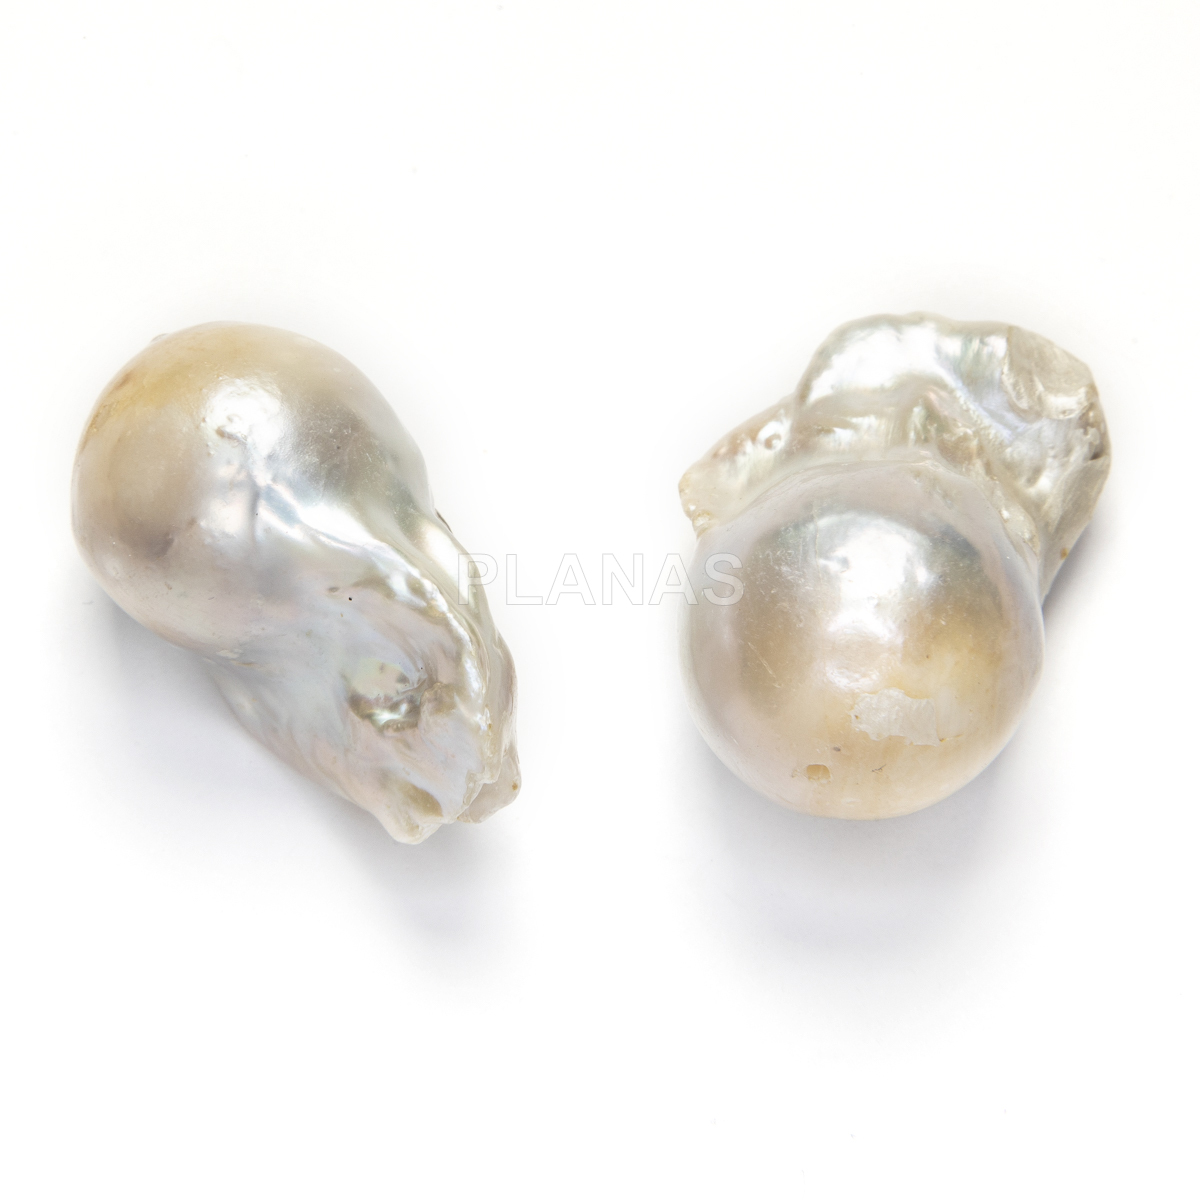 Freshwater cultured pearl.27x17mm.